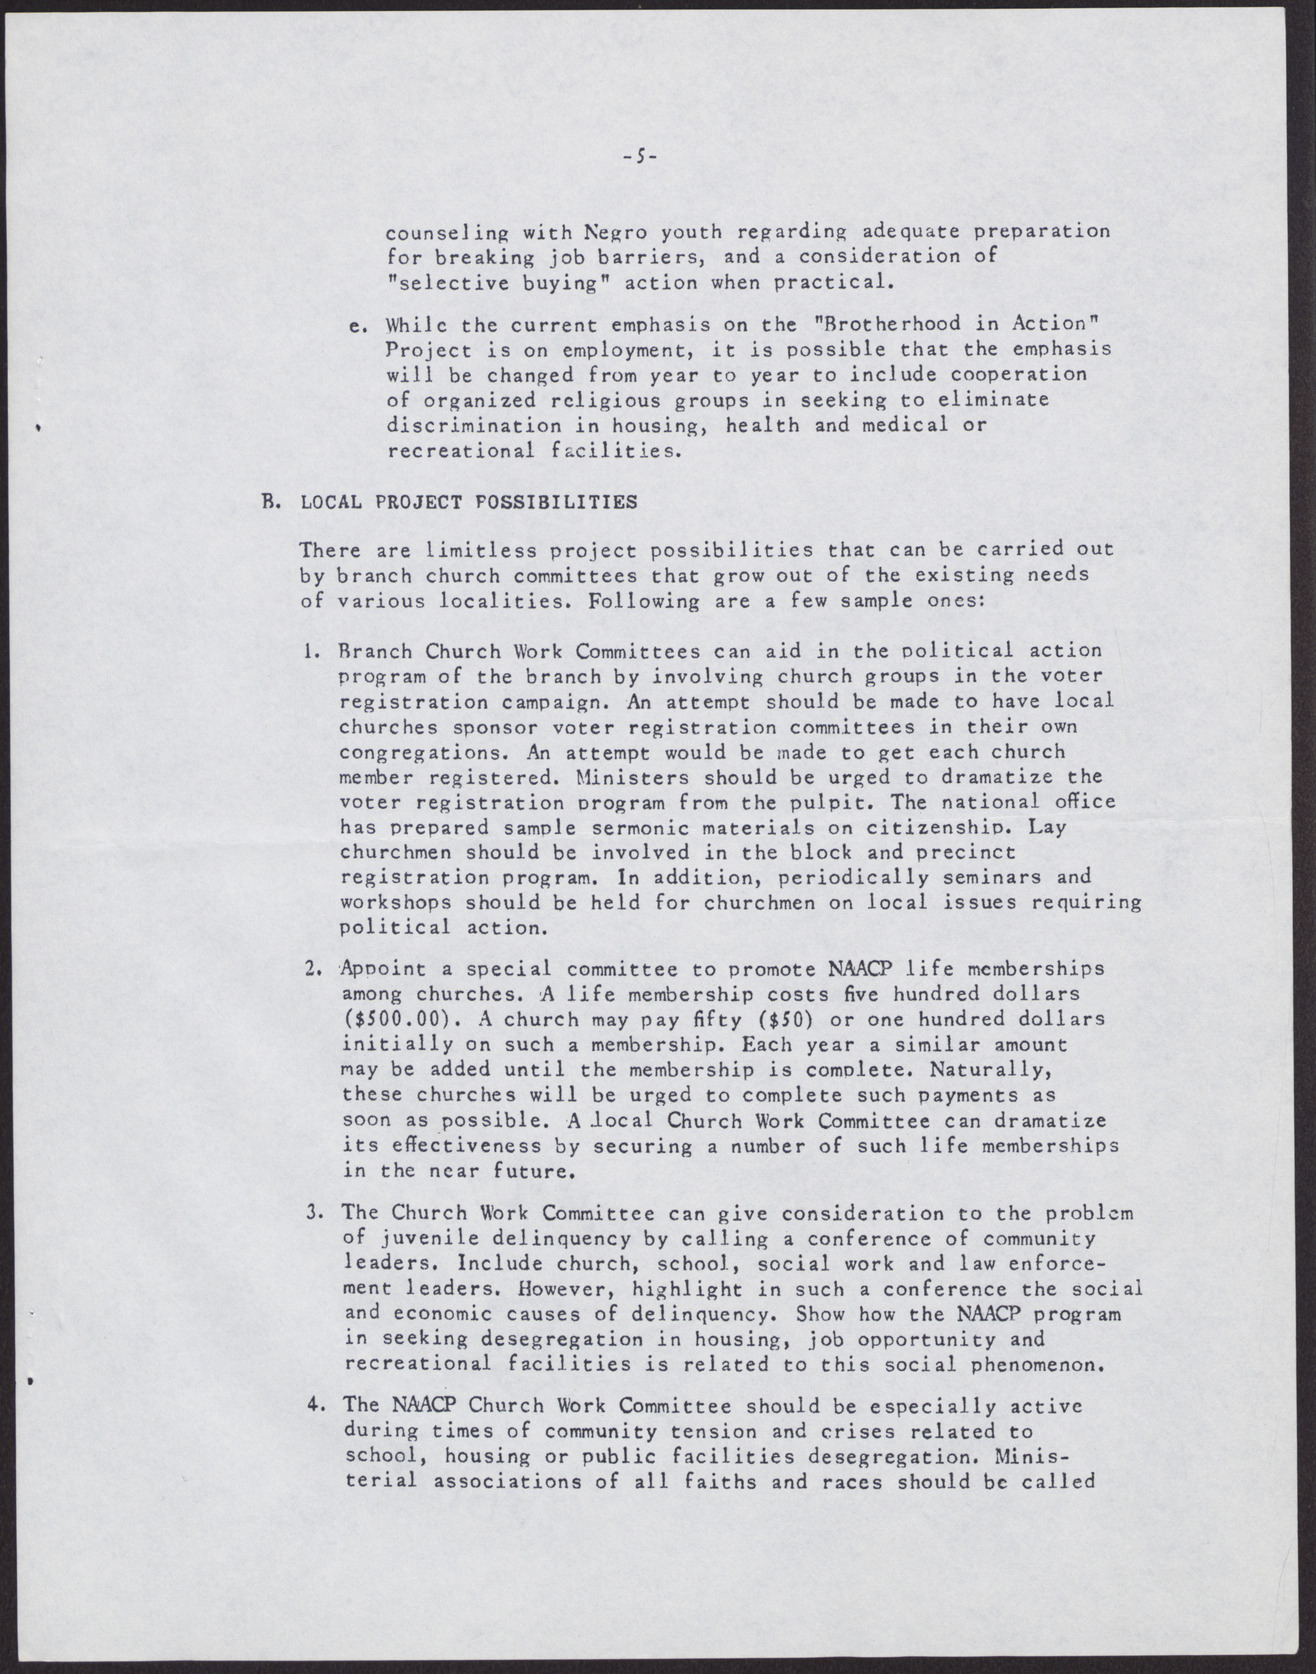 Program Suggestions for Branch Church Committees of the National Association for the Advancement of Colored People (9 pages), no date, page 8